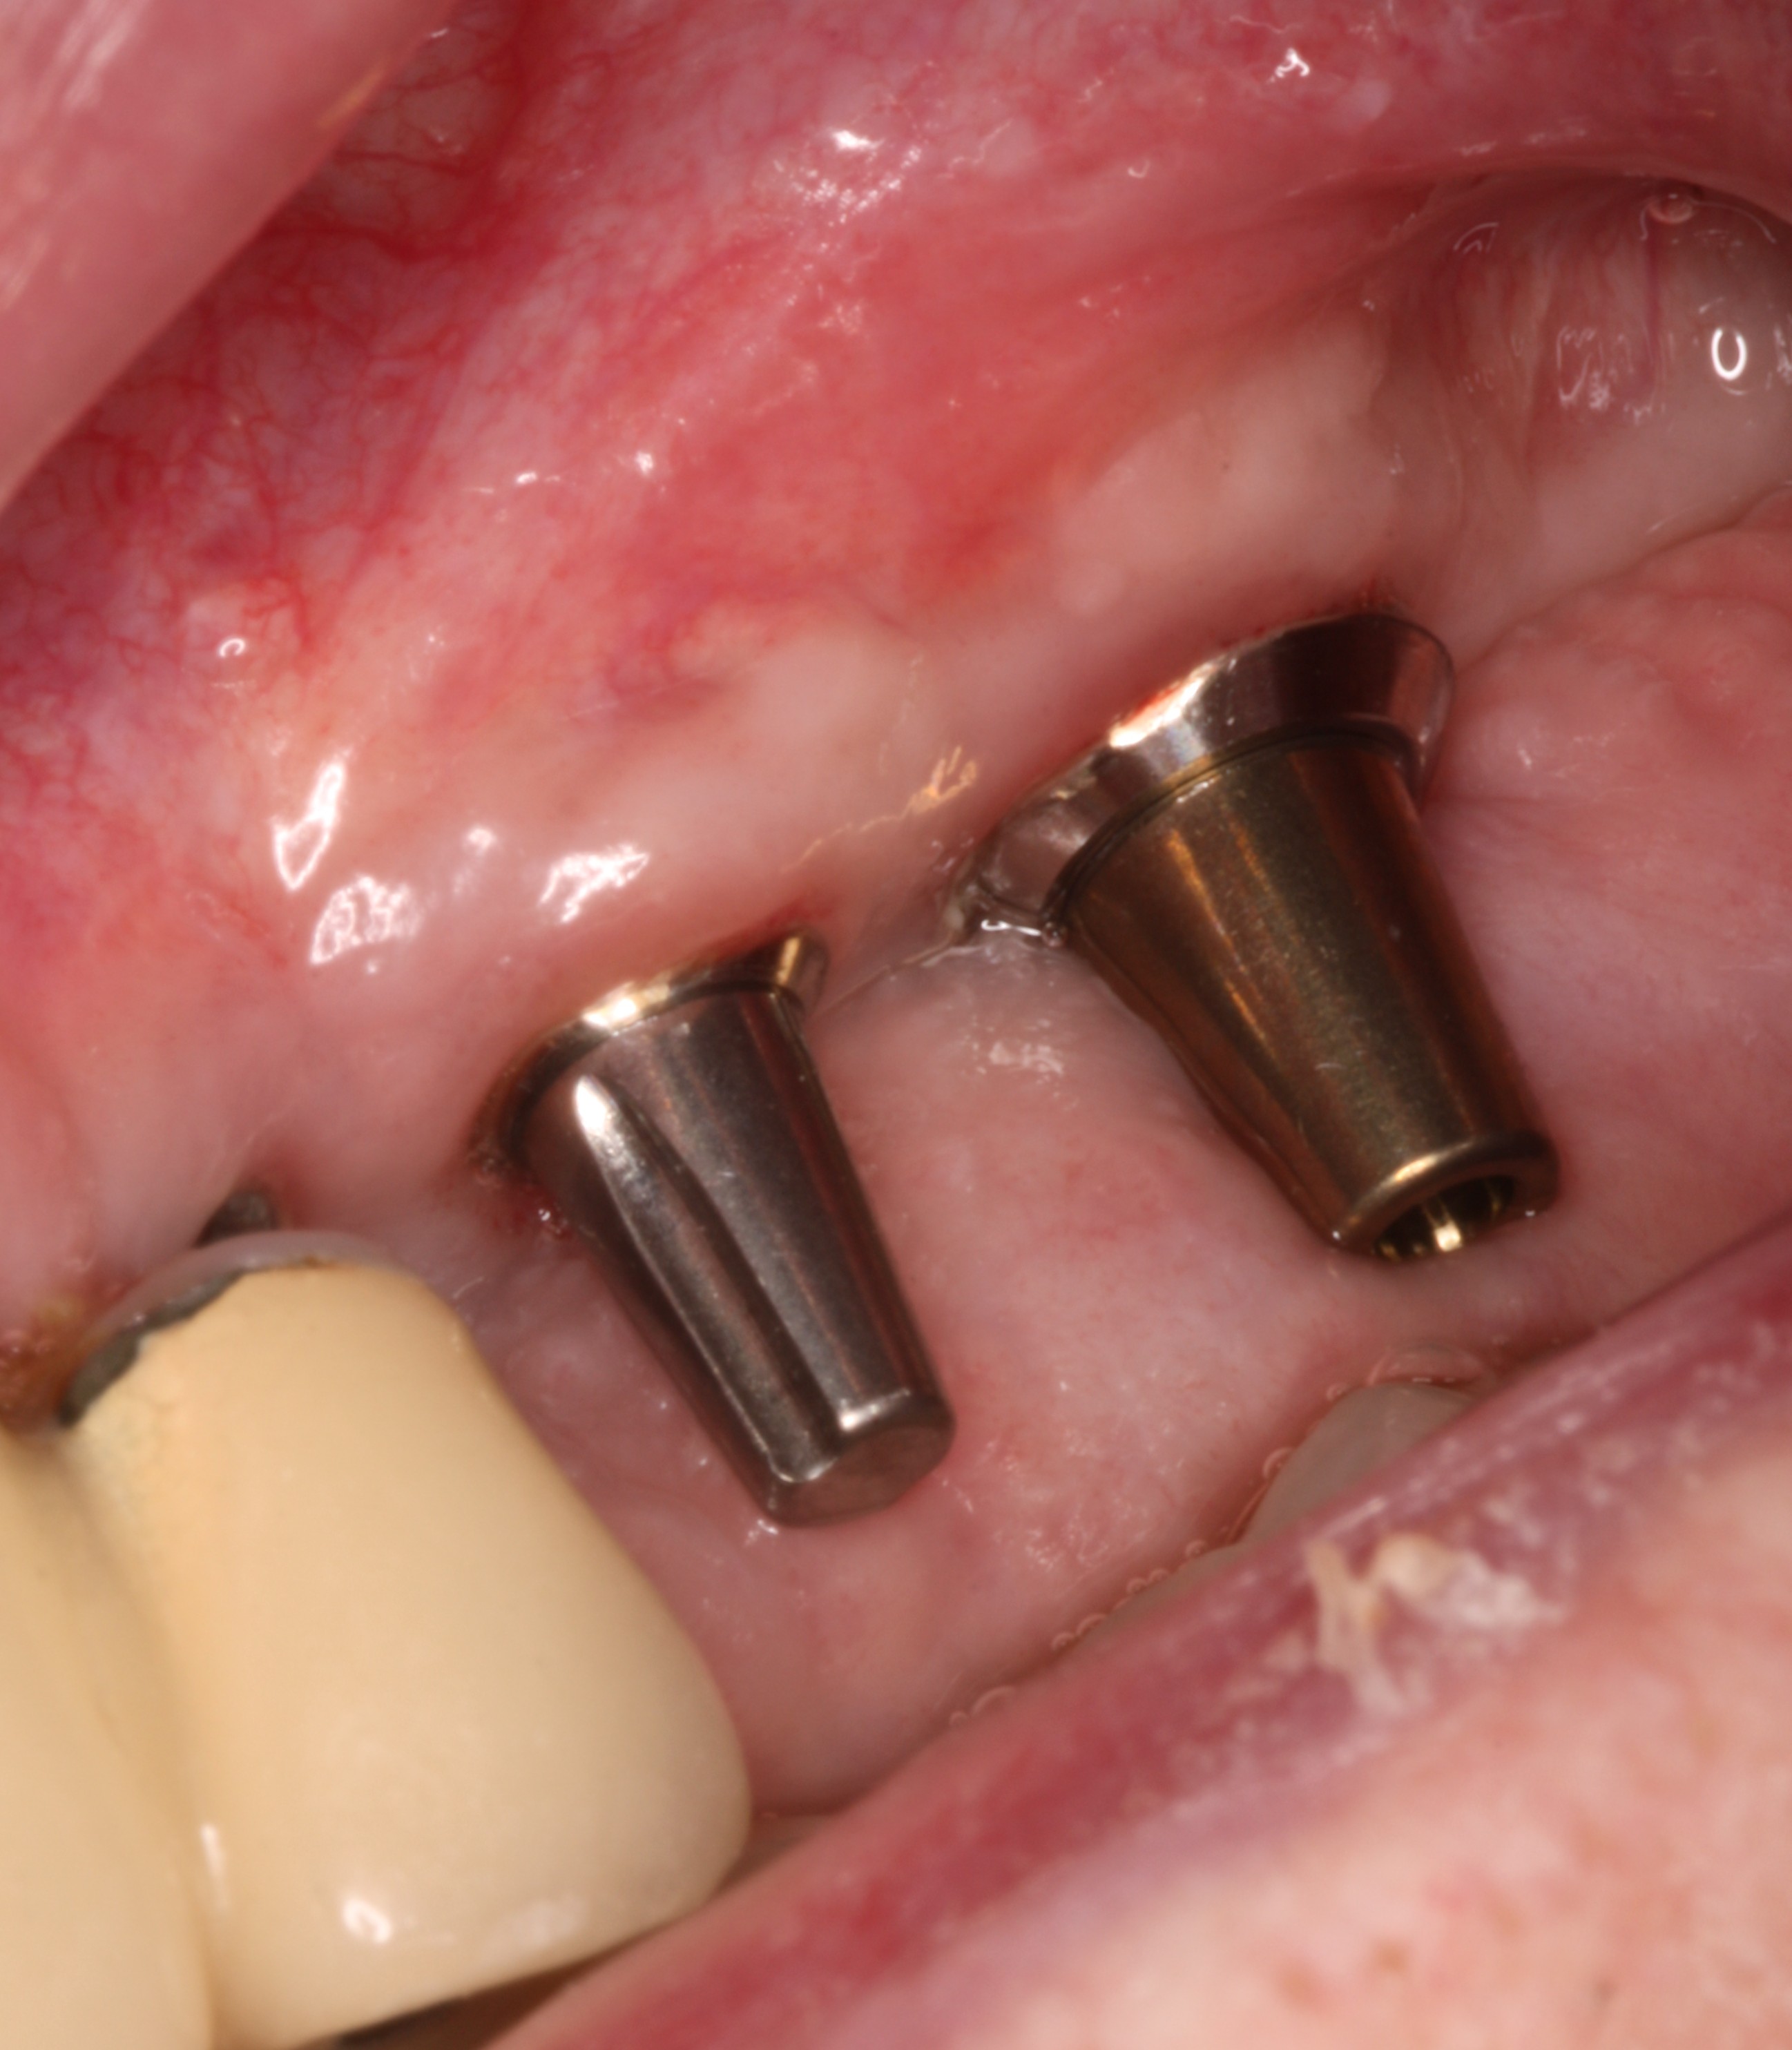 Dental implants with abutments ready for restorative treatment.